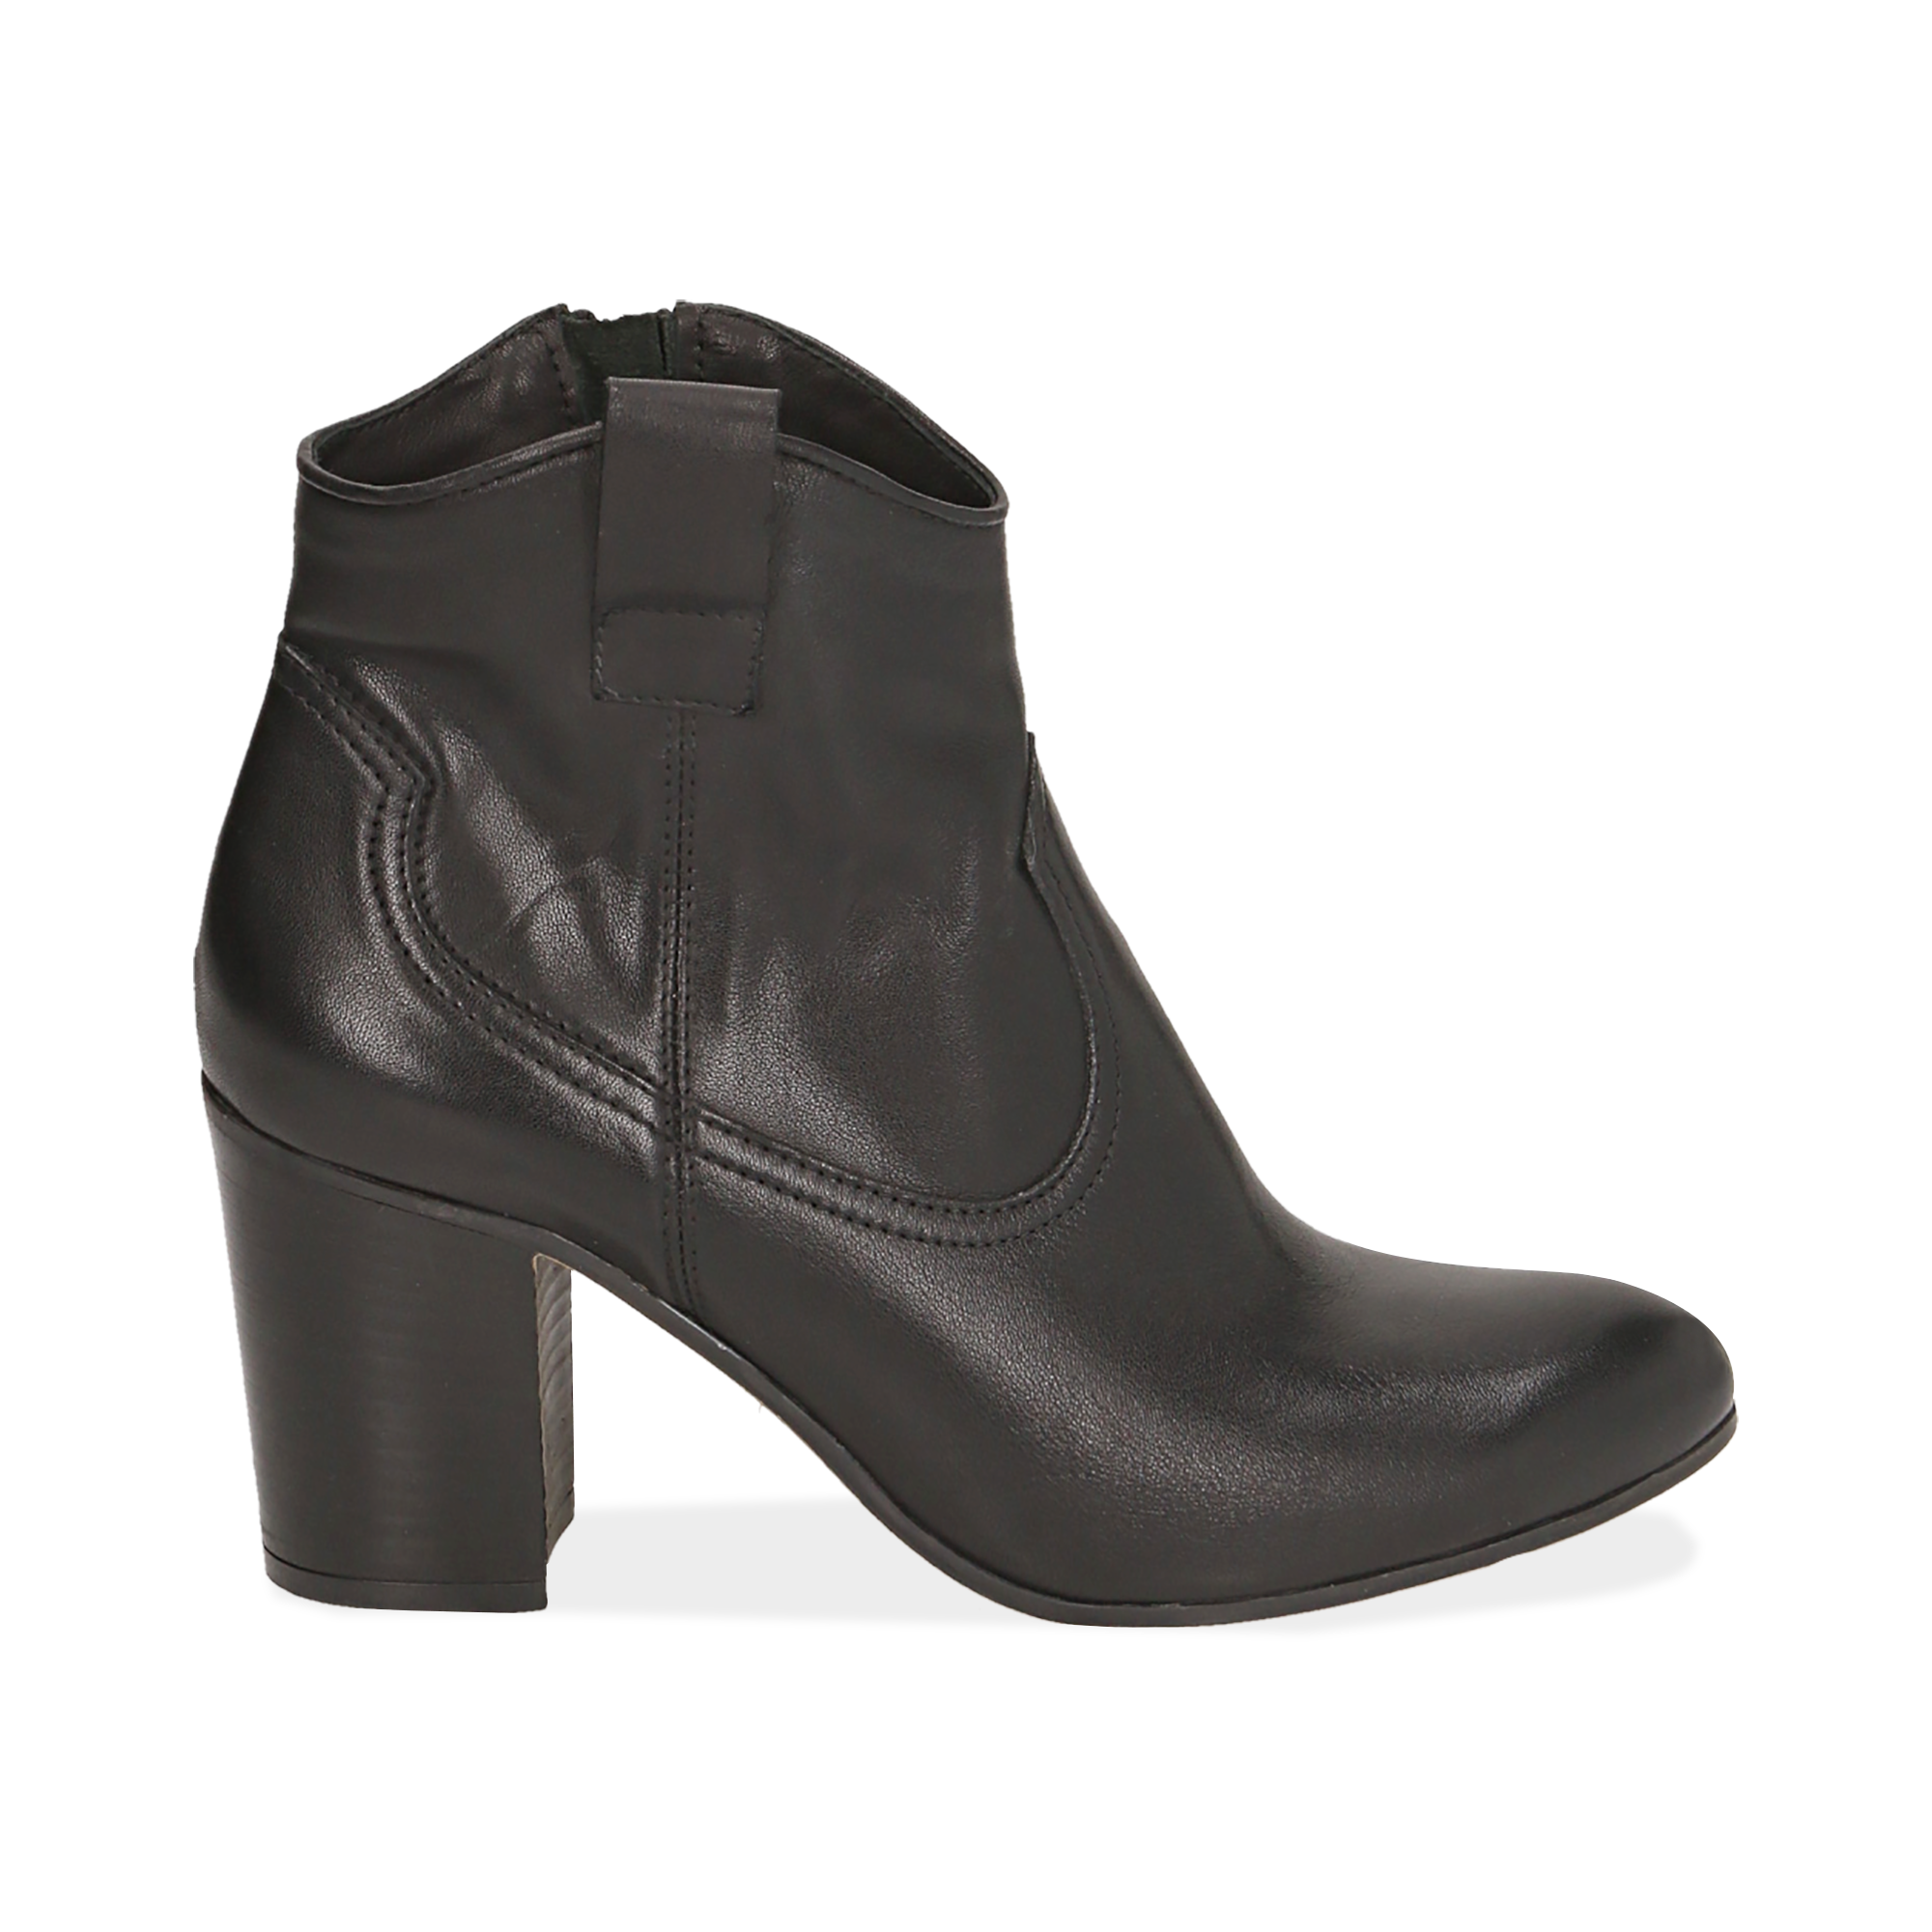 Ankle boots neri in pelle, tacco 7,50 cm